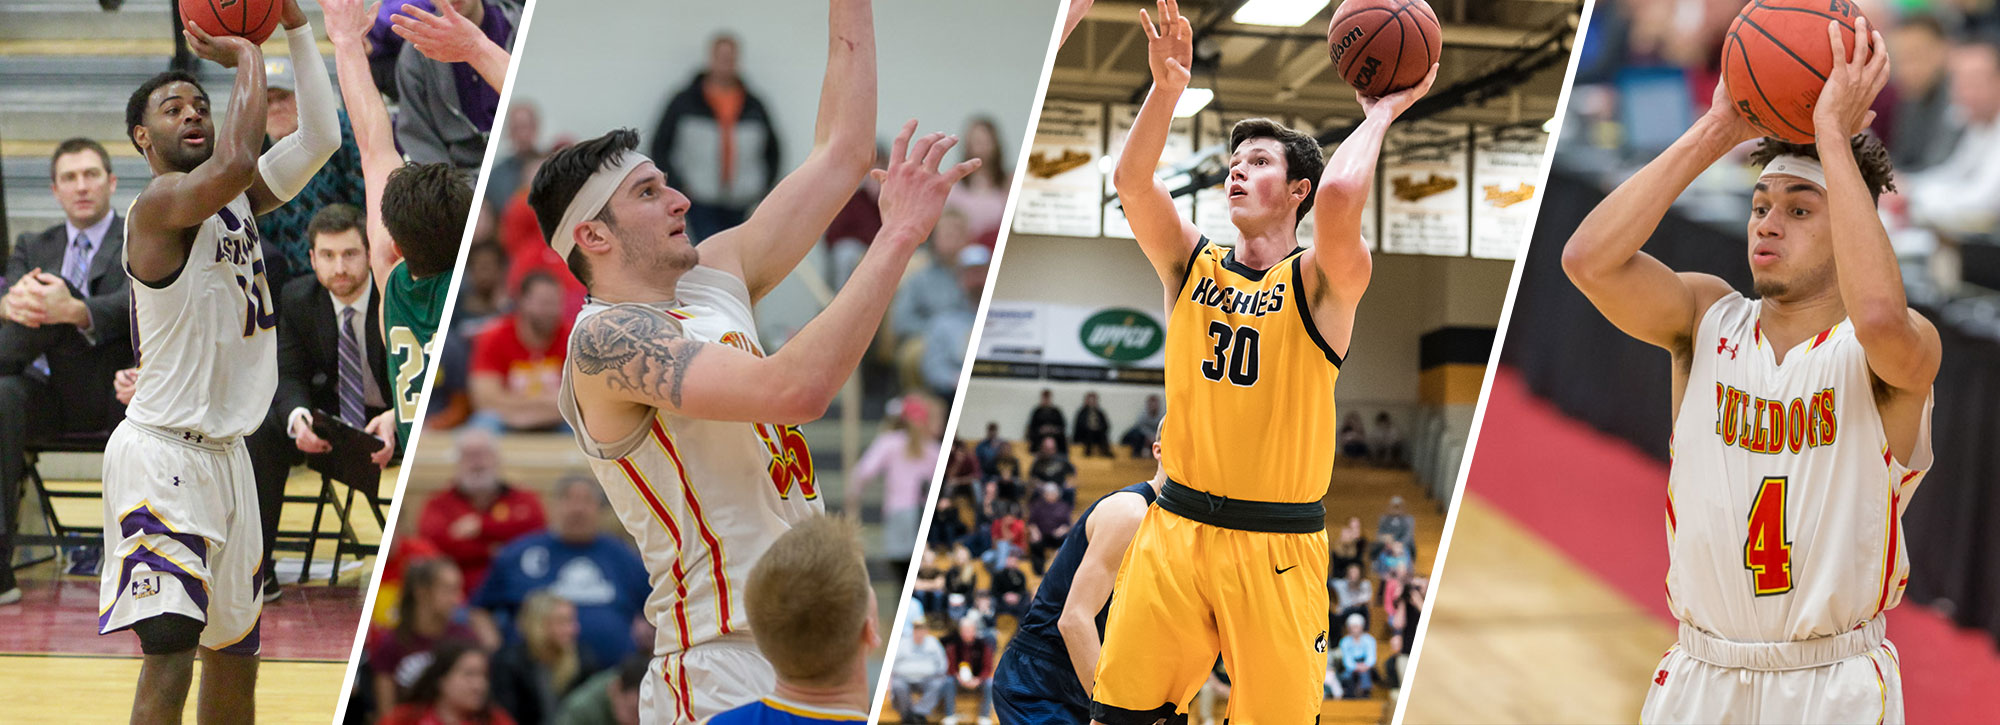 Ferris State's Hankins Named 2018 D2CCA Midwest Region Player of the Year; Four GLIAC Standouts Honored